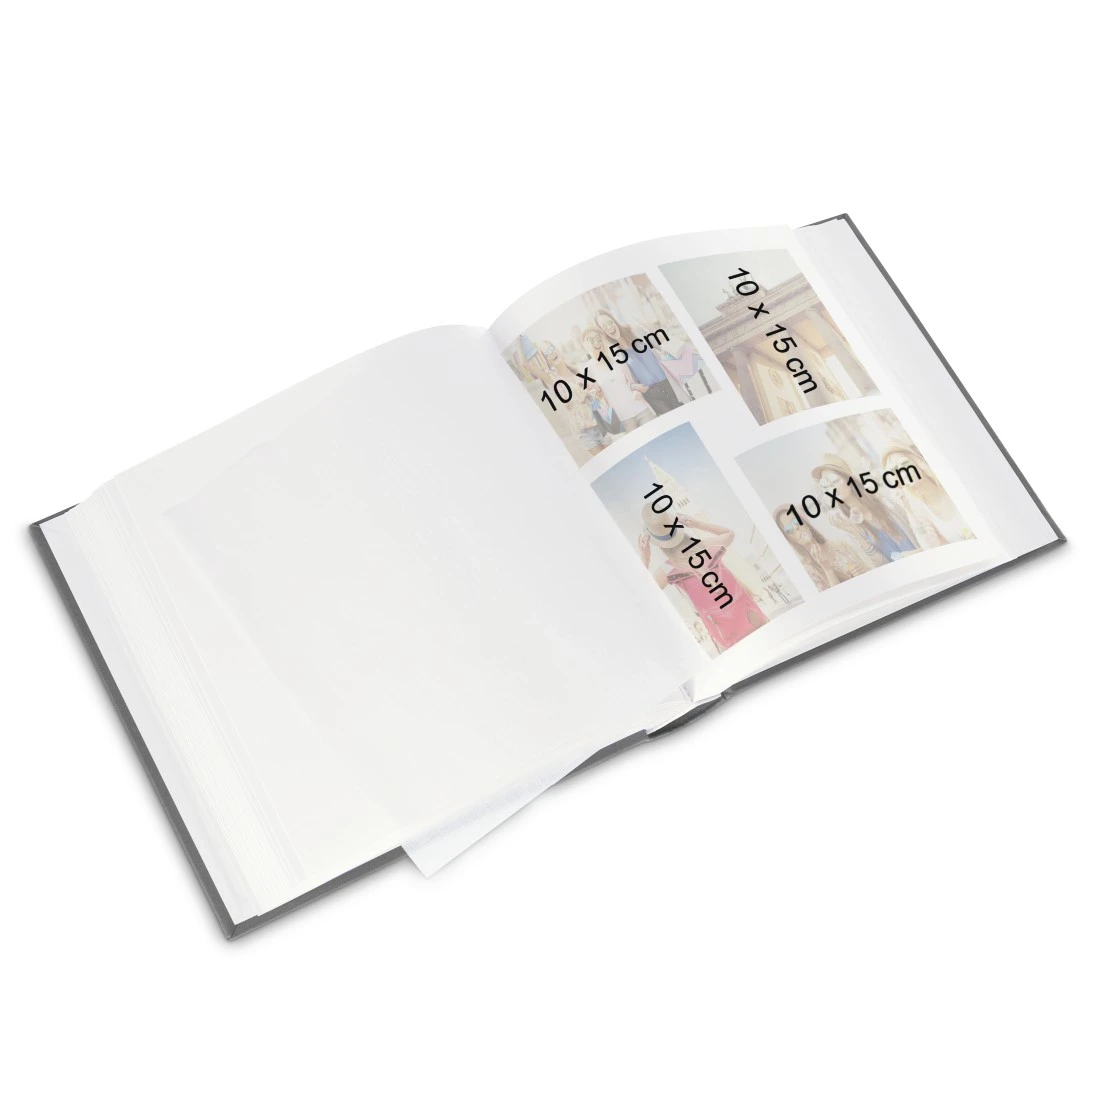 Album photo grand format 'brushstroke' 30x30cm 80 pages blanches